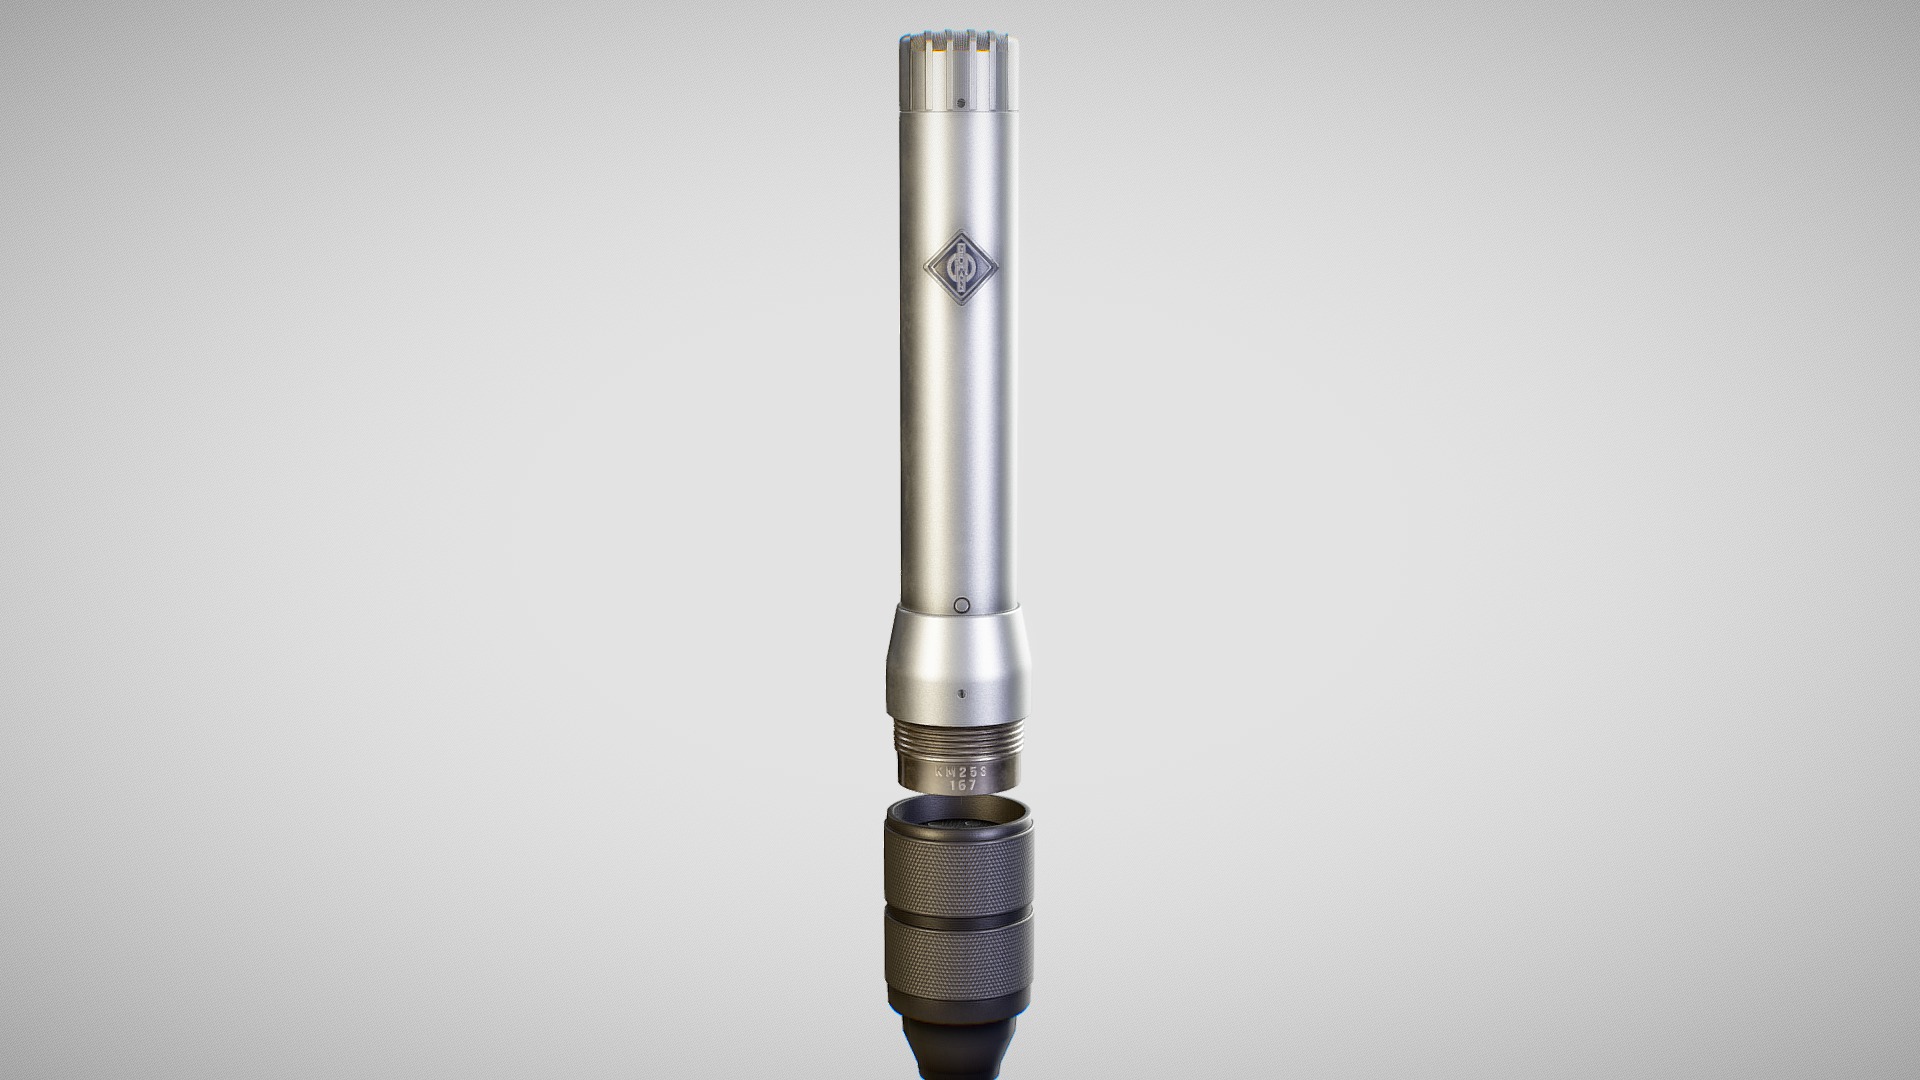 3D model based on reference pictures of the Neumann KM253 microphone.

Modeled with Blender 2.8 Beta. Textures created with Substance Painter.

Purchasing this model will grant you access the version in this viewer (with Bevel modifier) and a Low-Poly version (without Bevel modifier).

Textures are in 4K PBR format 3d model